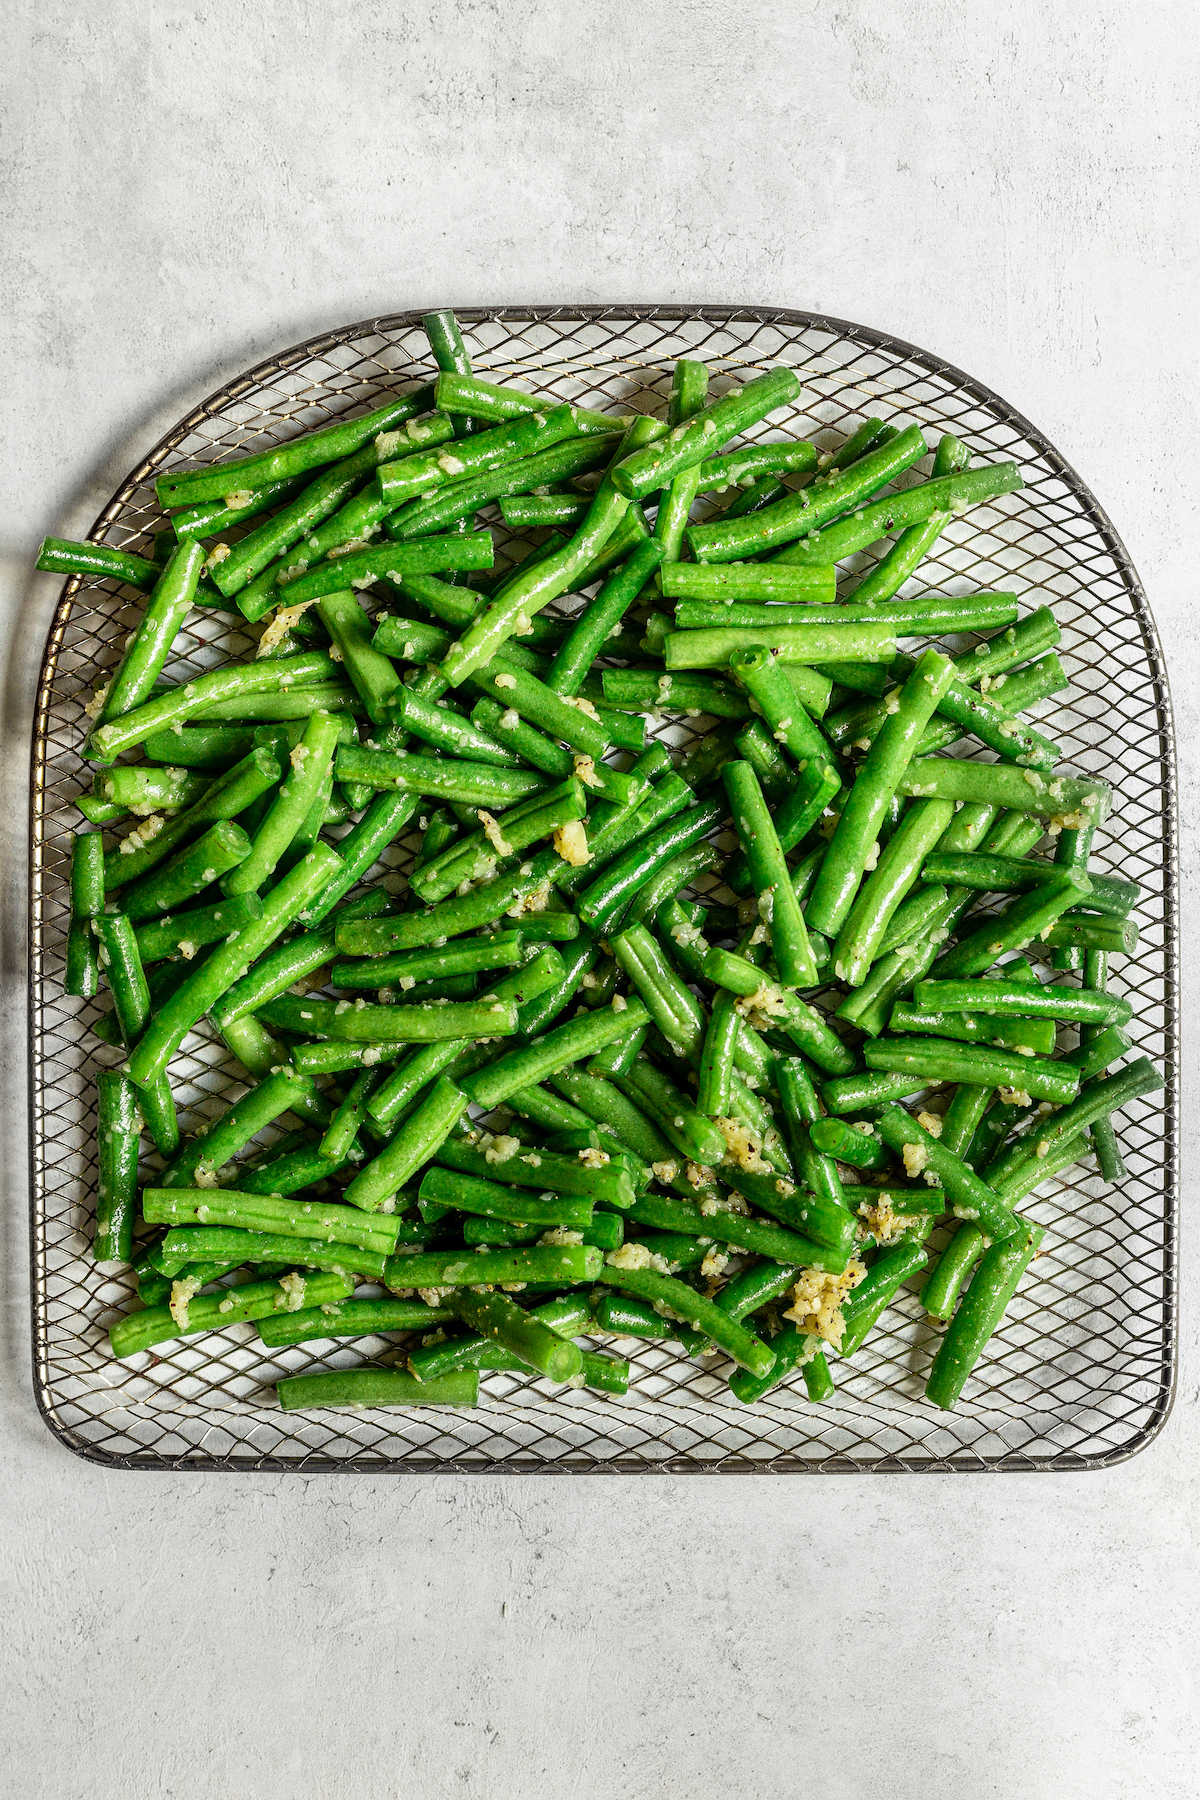 Raw green beans on the tray of an air fryer.